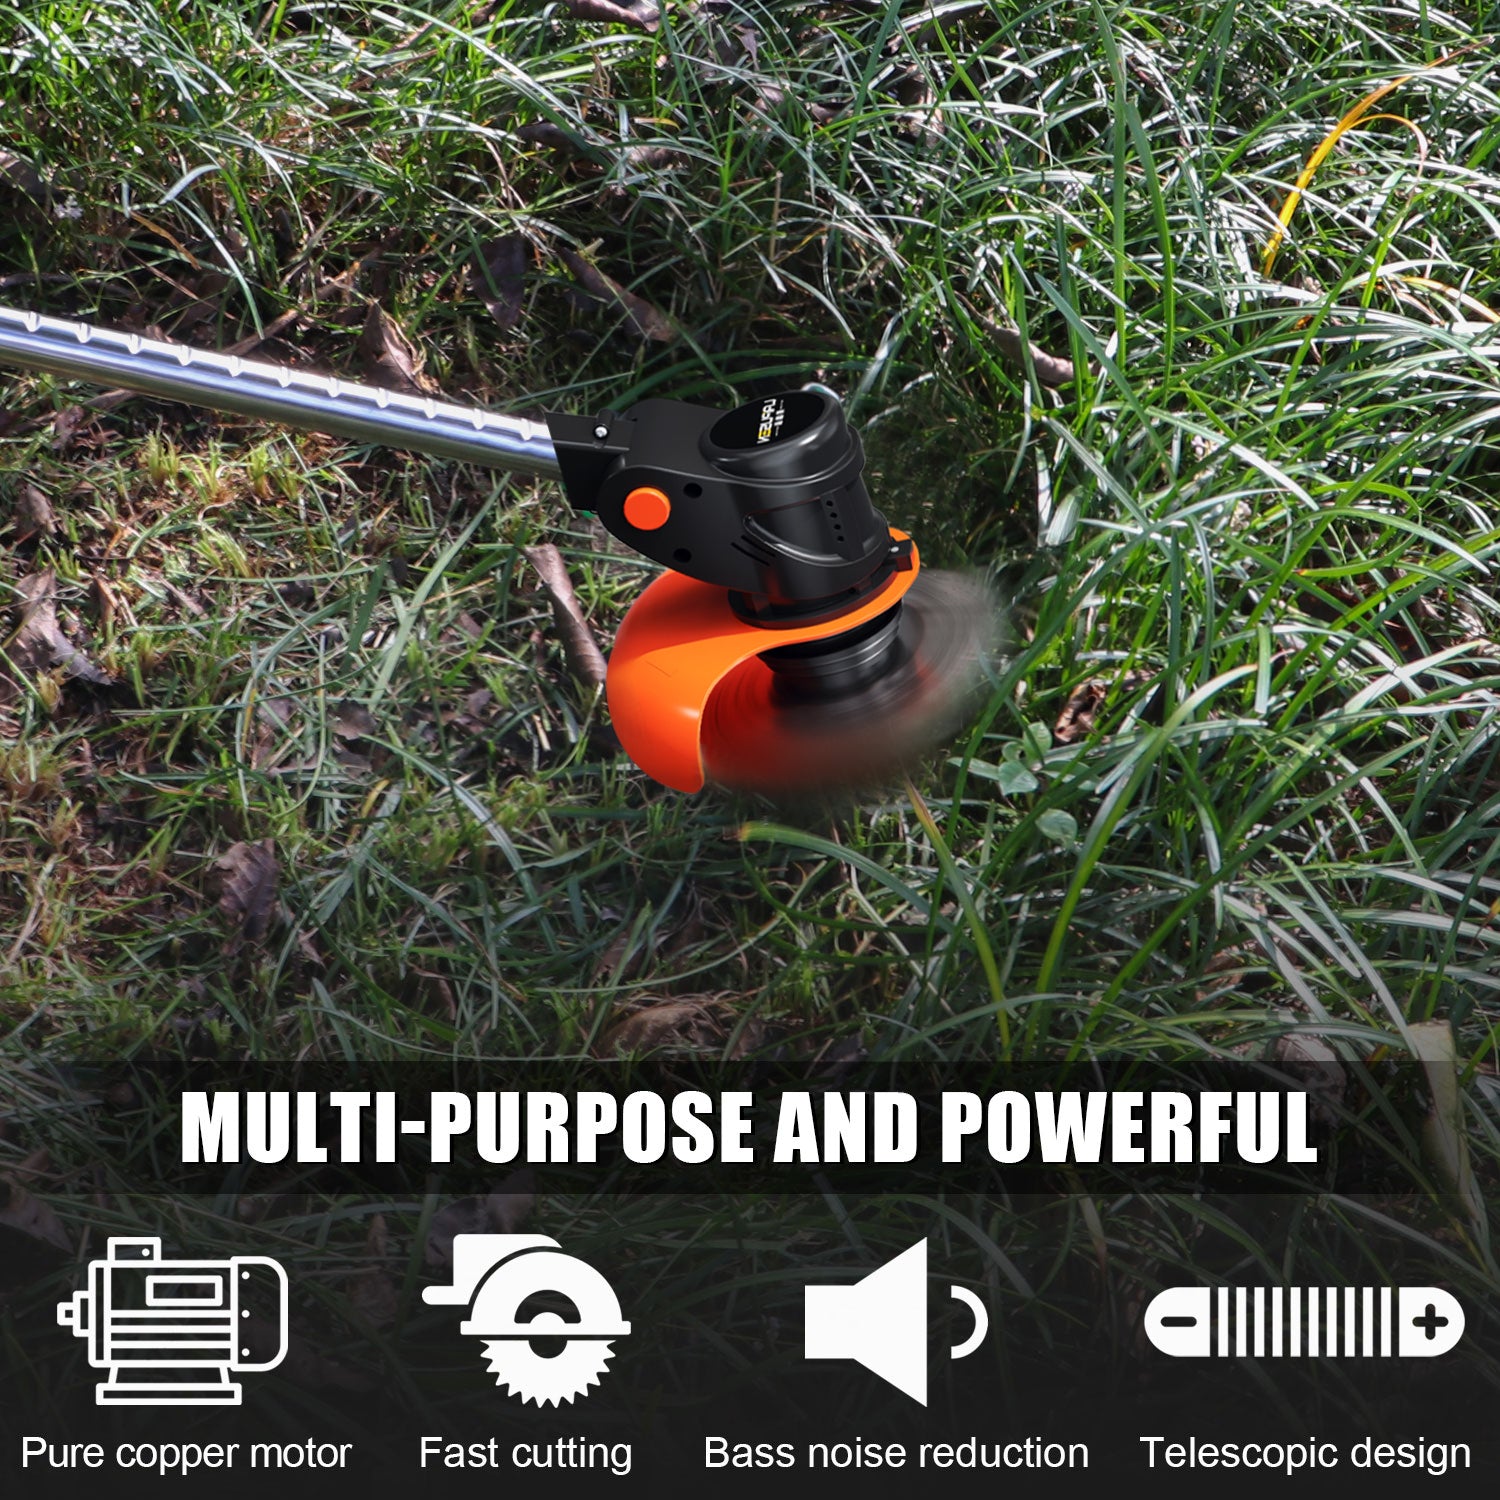 21V String Trimmer with 1.5 Ah Battery and Charger